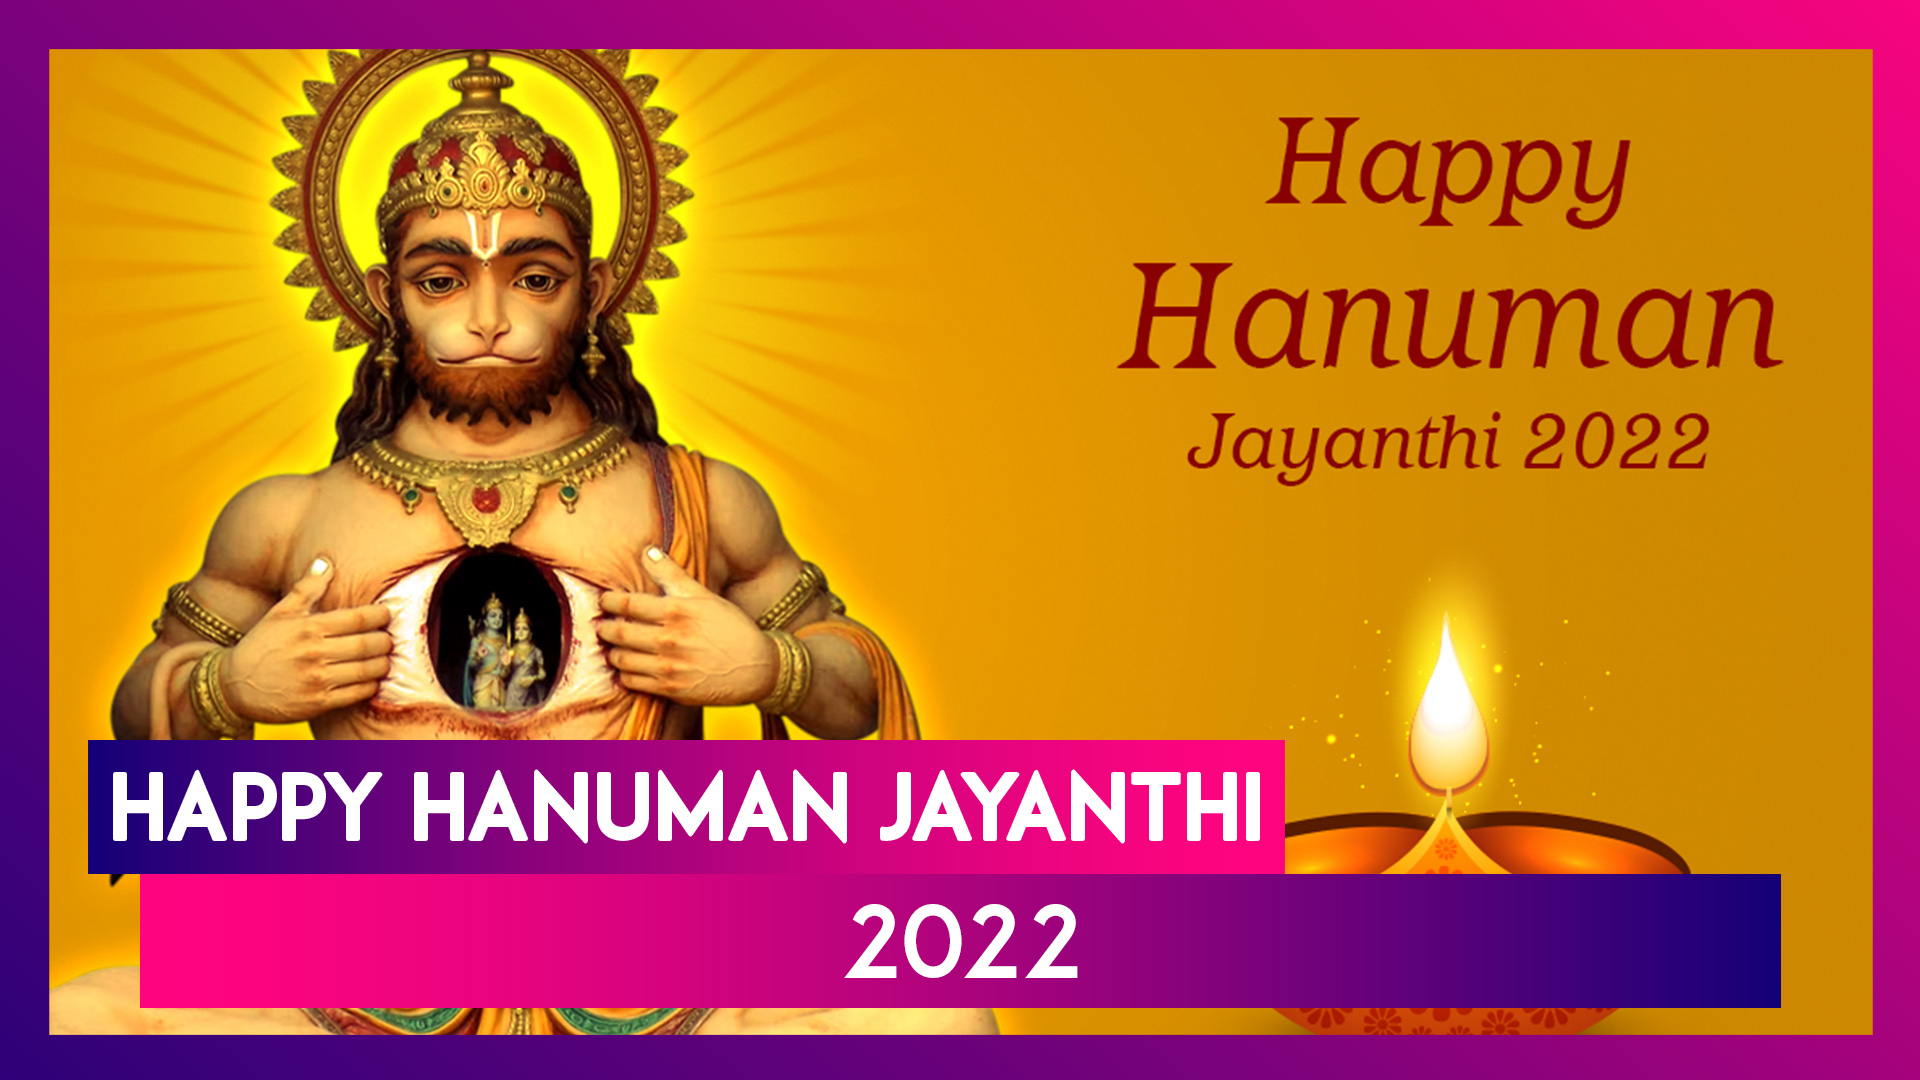 Telugu Hanuman Jayanti 2022 Wishes: Pictures, Quotes and Messages To Celebrate the Holy Occasion